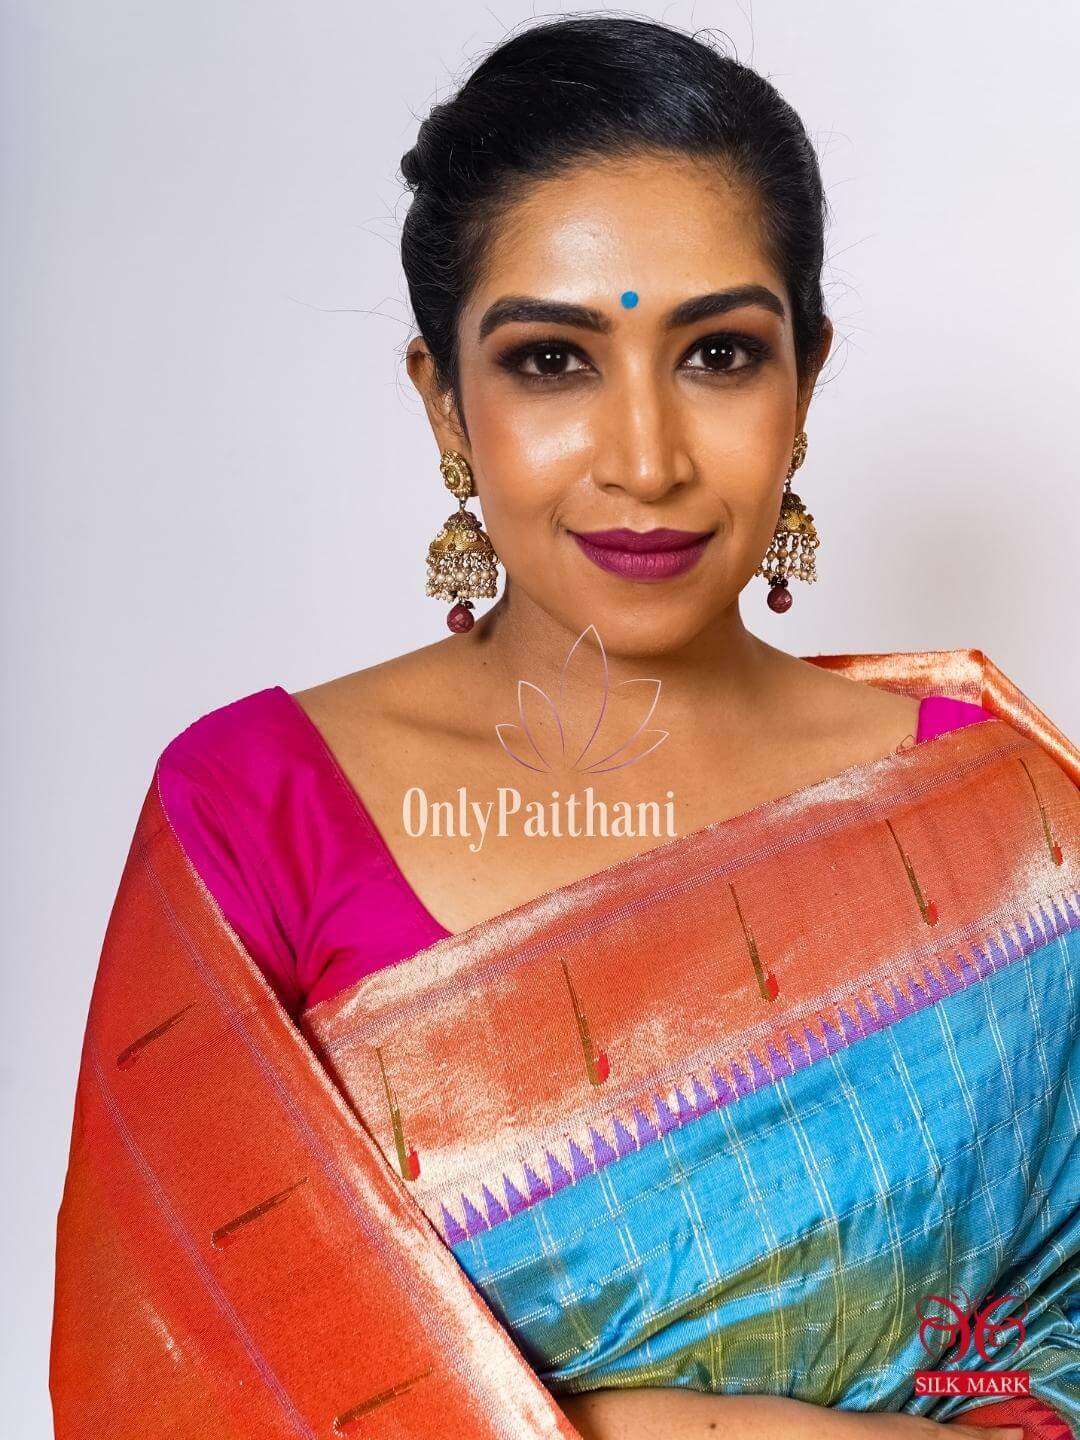 Paithaniwale The Online Paithani Store  on Instagram Maharashtrian  Engagement Makeover Makeup  Hairstyle  tejzzzmakeover Photography   tejzzzmakeover In the frame  jpranoti Contact